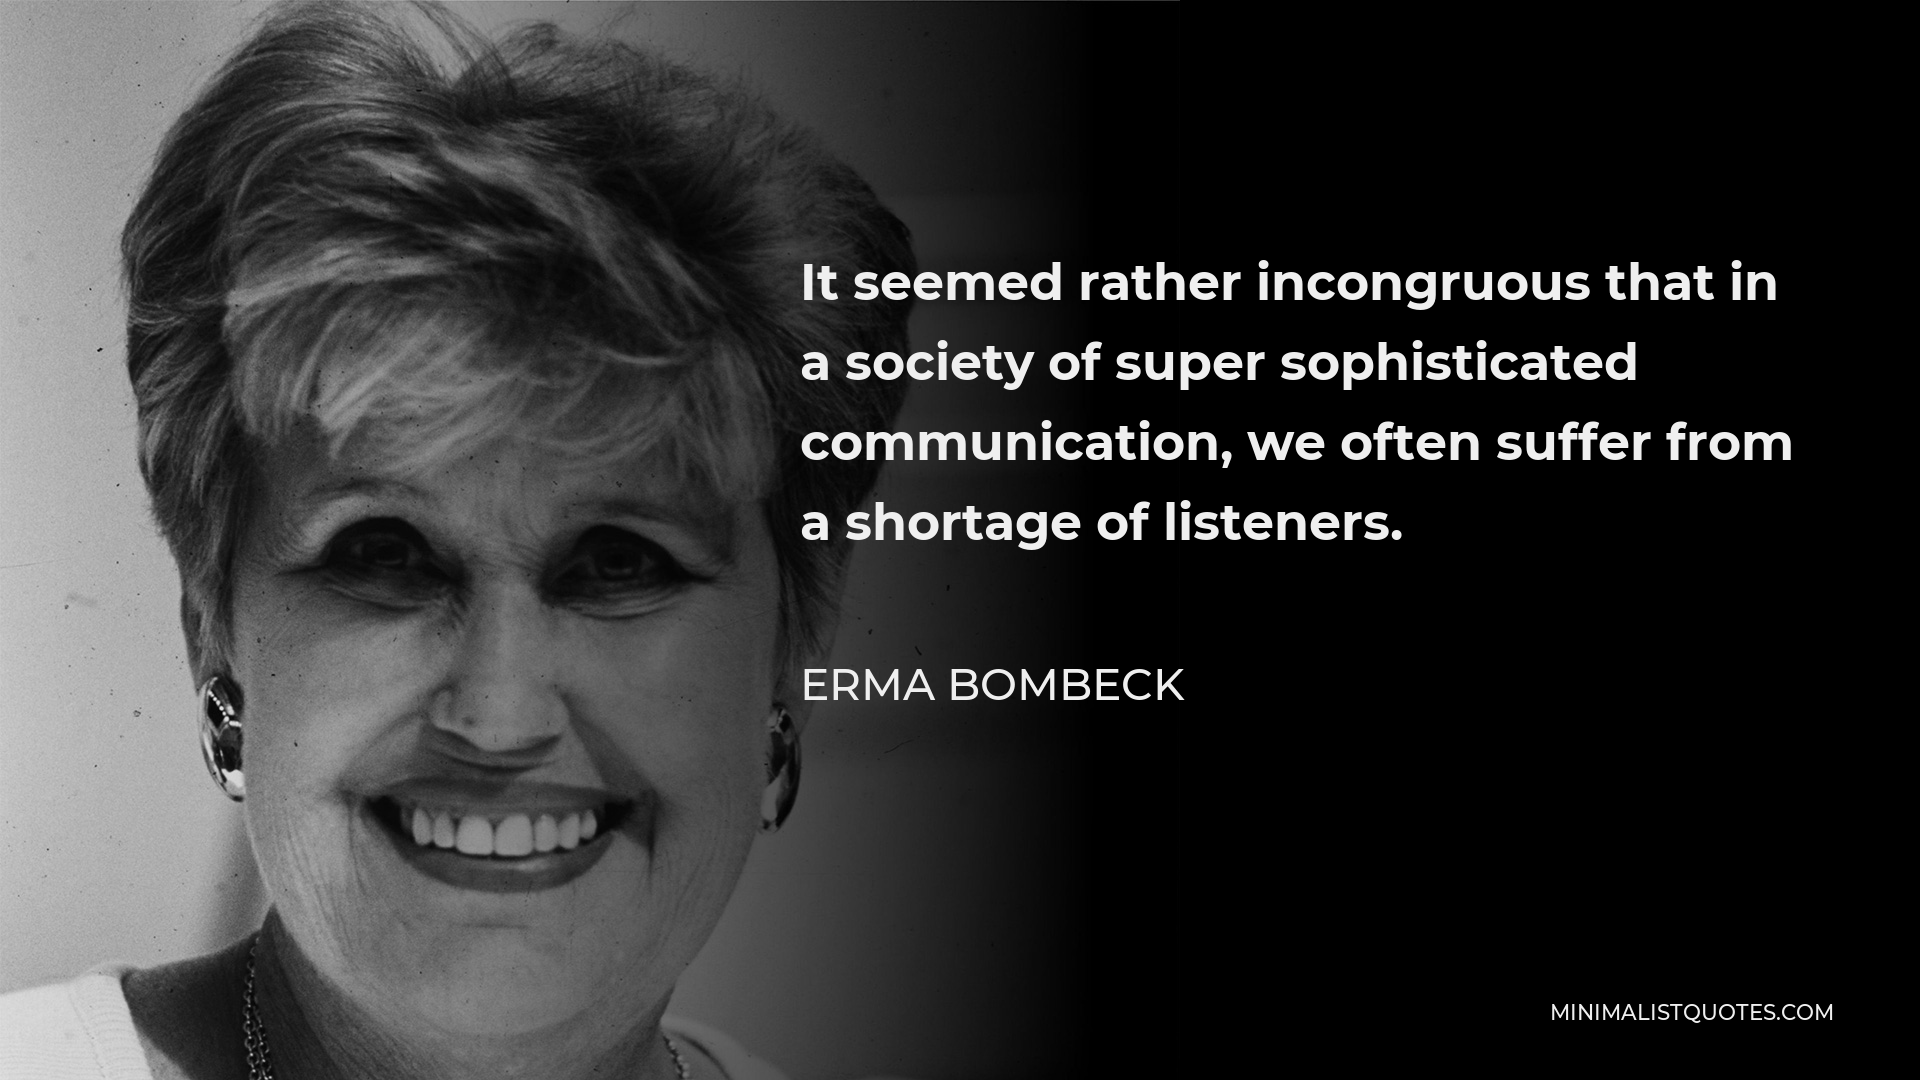 Erma Bombeck Quote - It seemed rather incongruous that in a society of super sophisticated communication, we often suffer from a shortage of listeners.